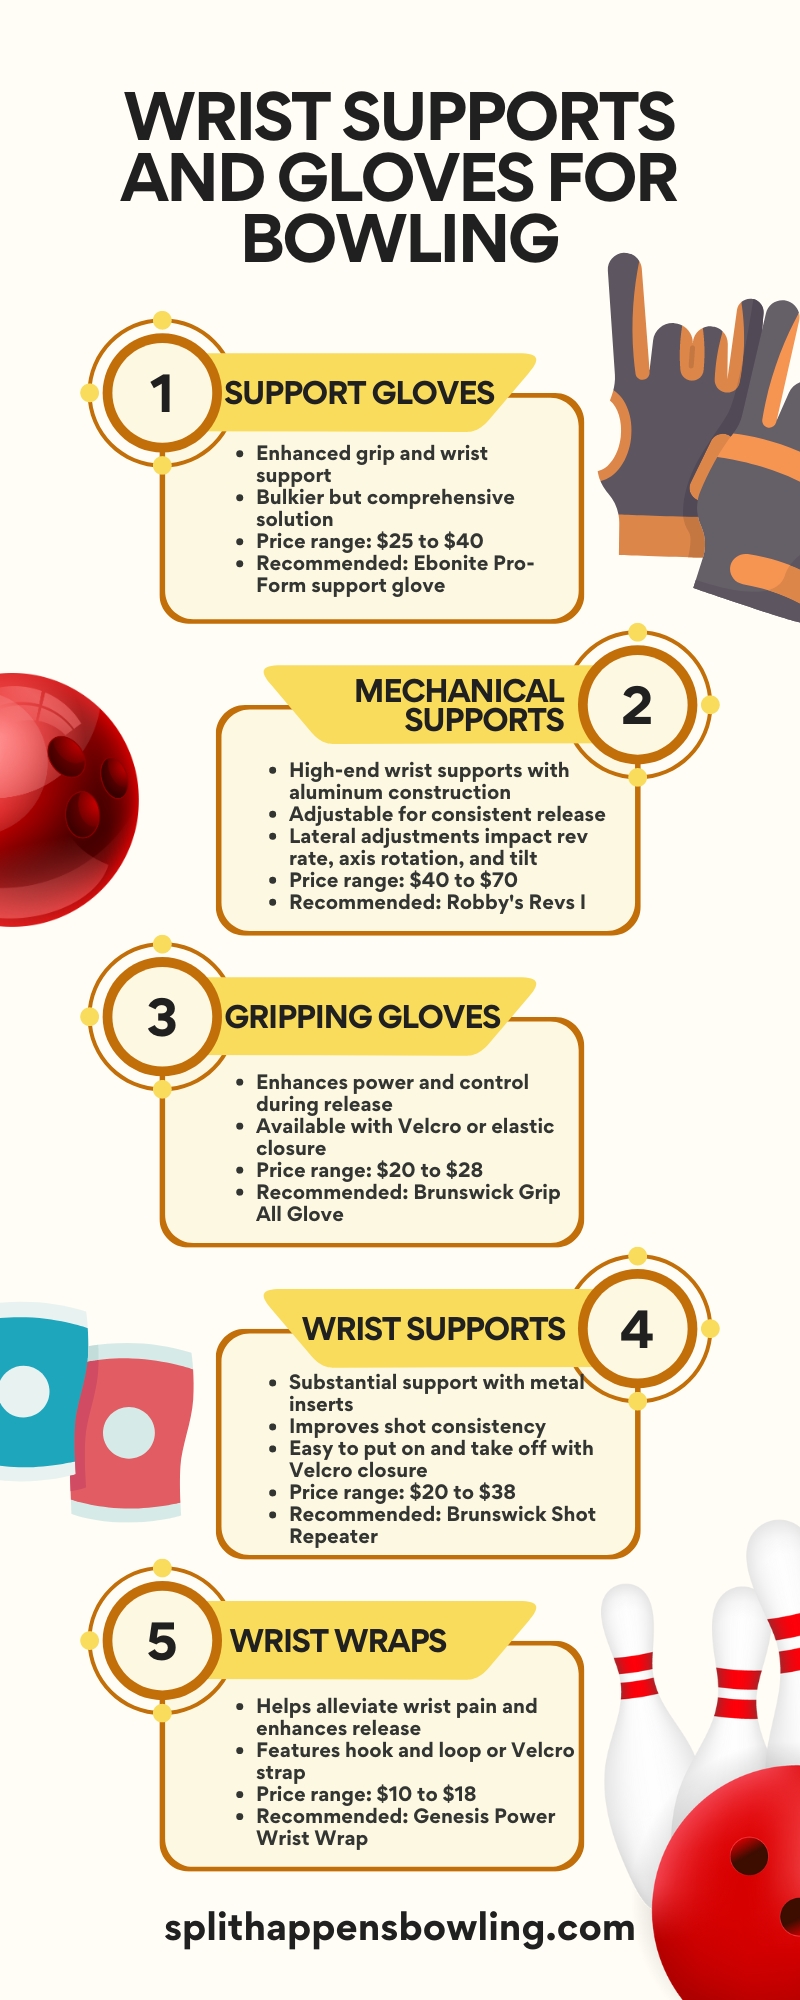 Wrist Supports and Gloves for Bowling Infographic